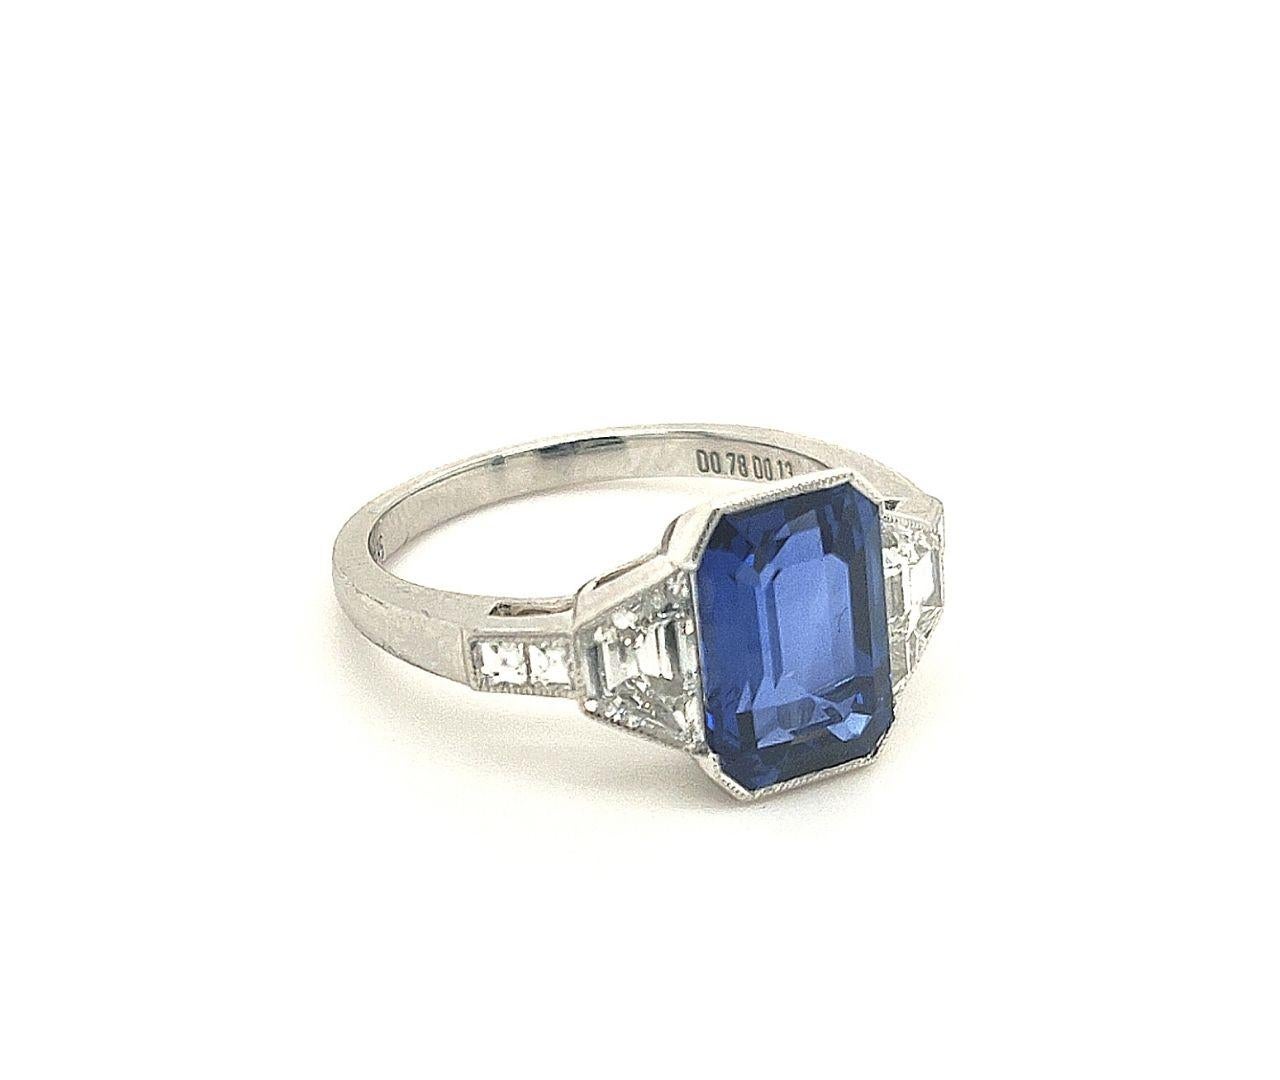 Certified sapphire center weighing 3.15 carats with two trapezoid diamonds weighing 0.78 carats and two square diamonds weighing 0.13 carats.